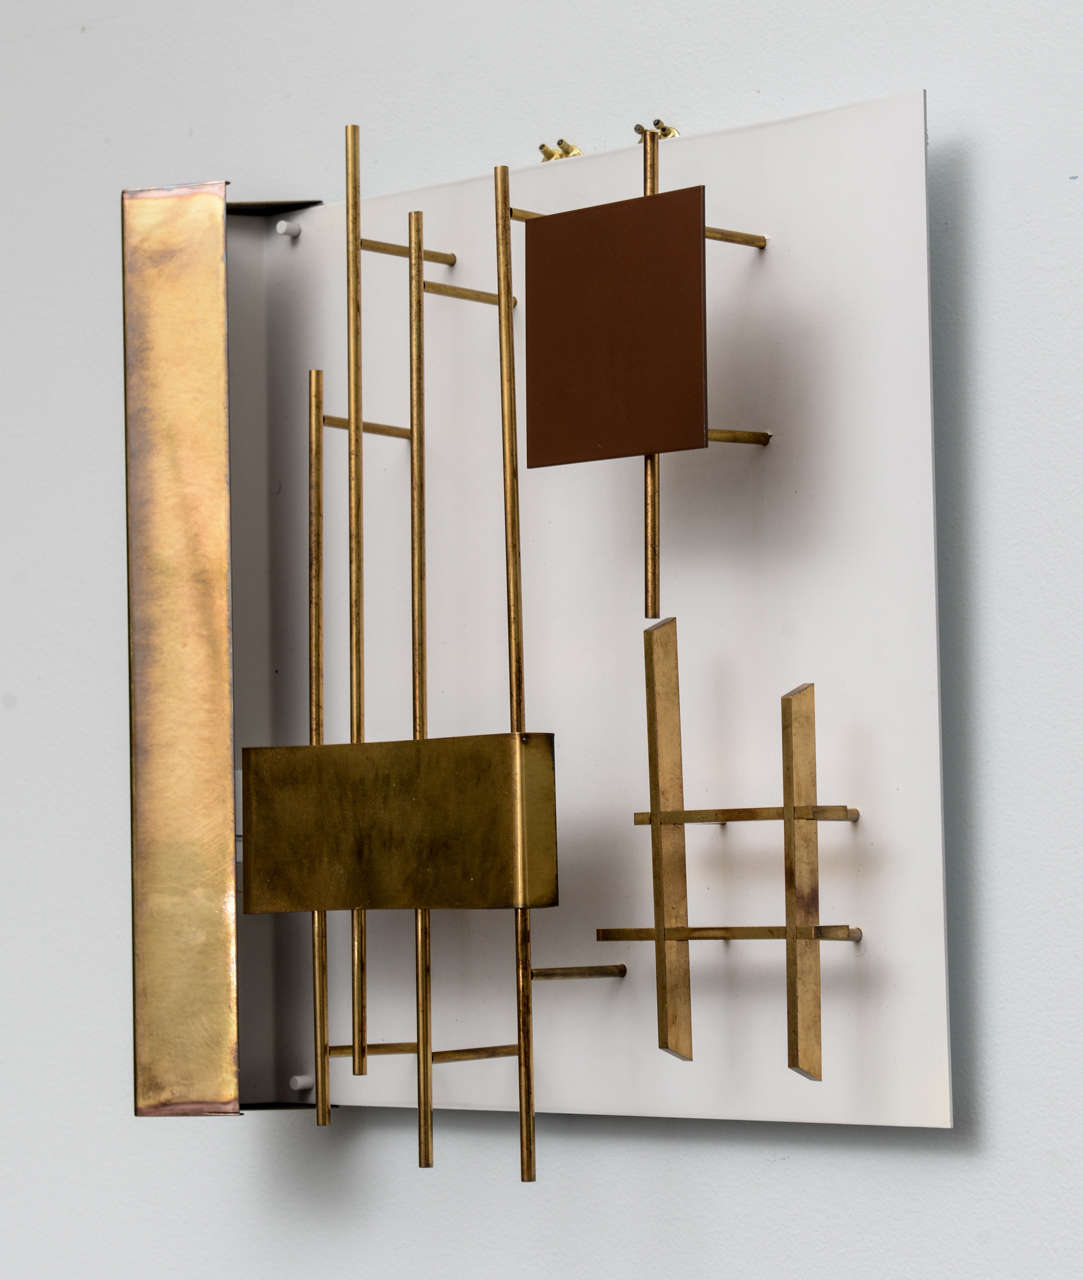 With brass geometric pieces set in an abstract pattern on an enameled back plate
literature- Gio Ponti, Ugo La Pietra
a single of this model sold at wright auction Chicago, 2013, for 8000 plus buyer’s premium.